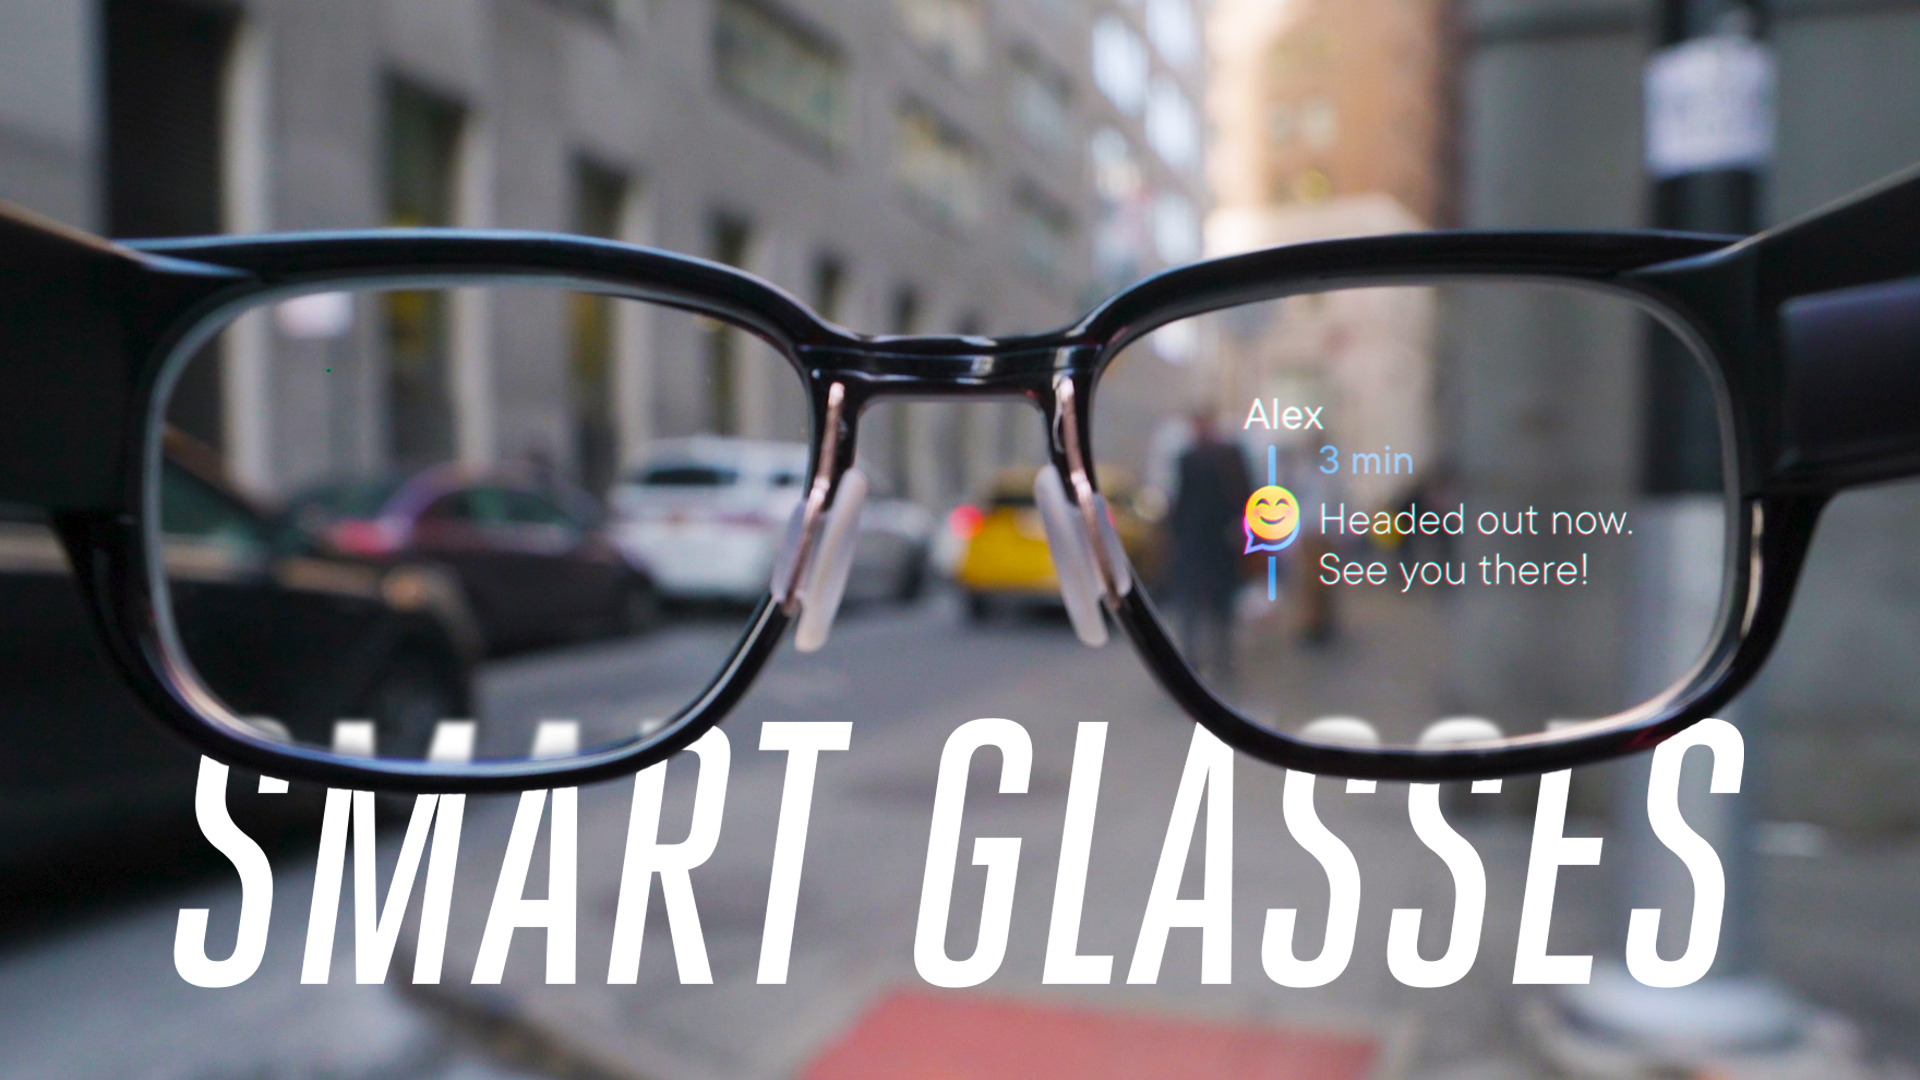 North Focals glasses review: a $600 smartwatch for your face - The Verge